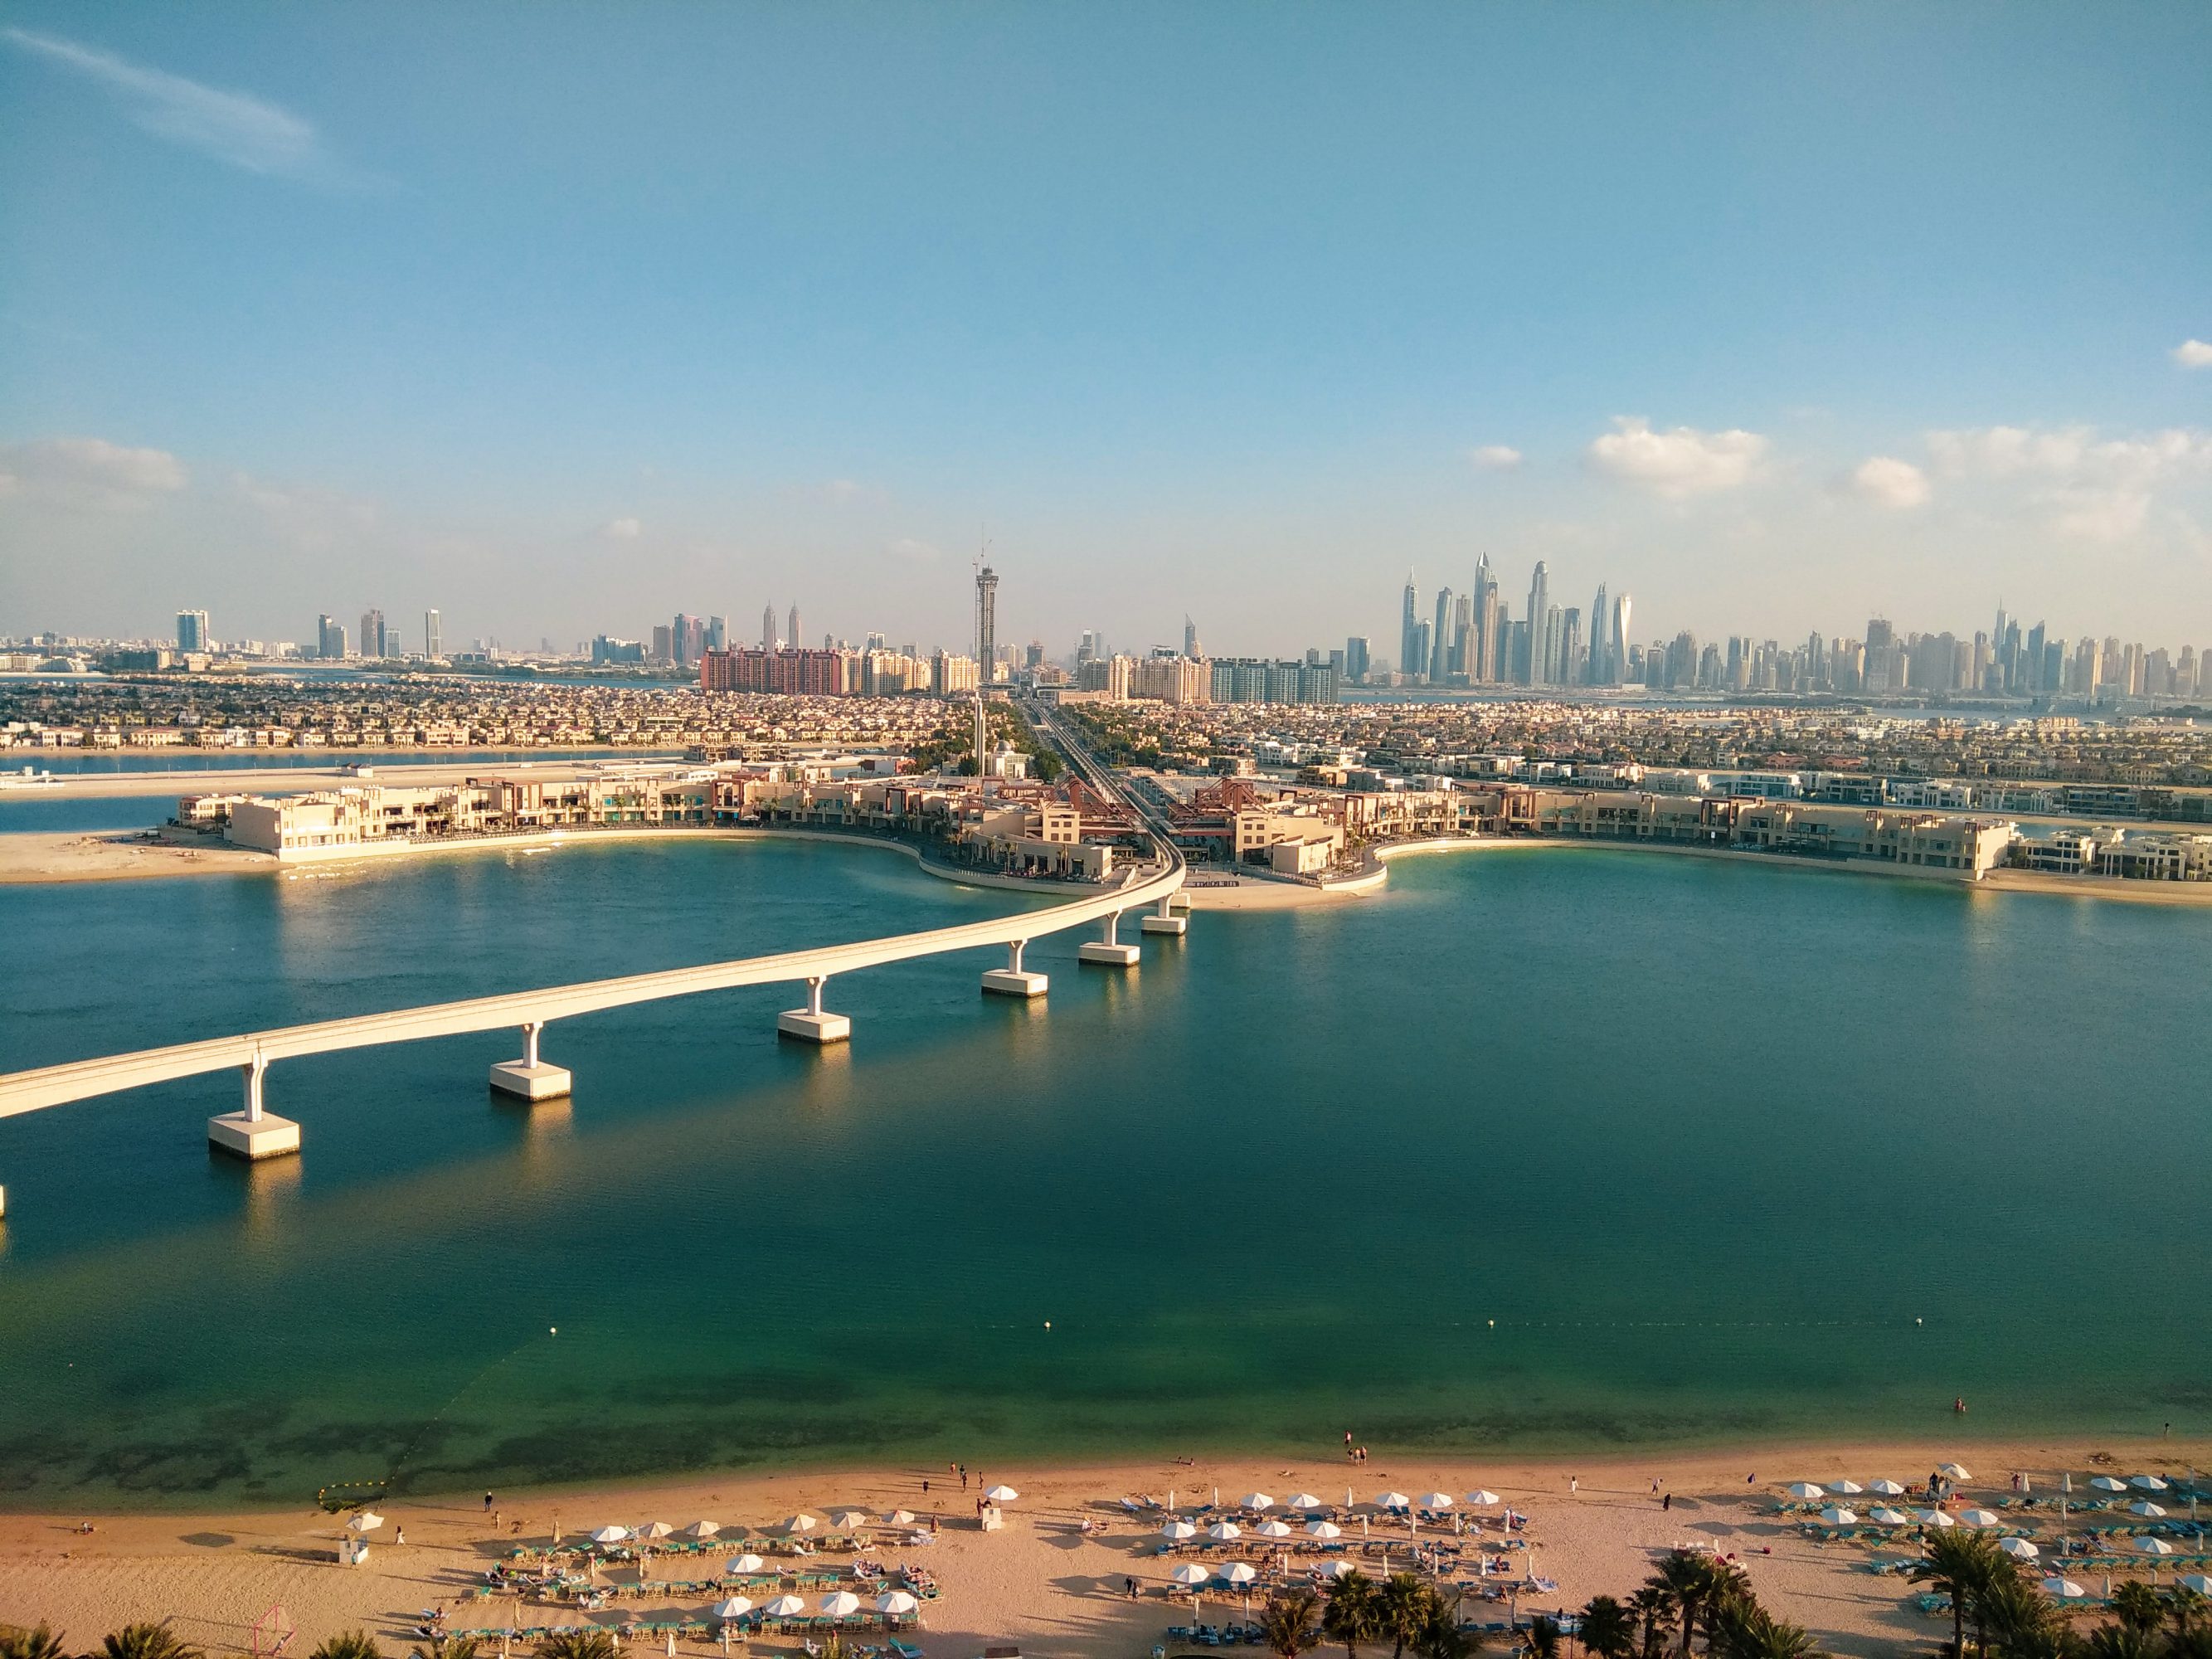 View of Dubai Skyline from one of Imperial Club rooms in Atlantis, The Palm